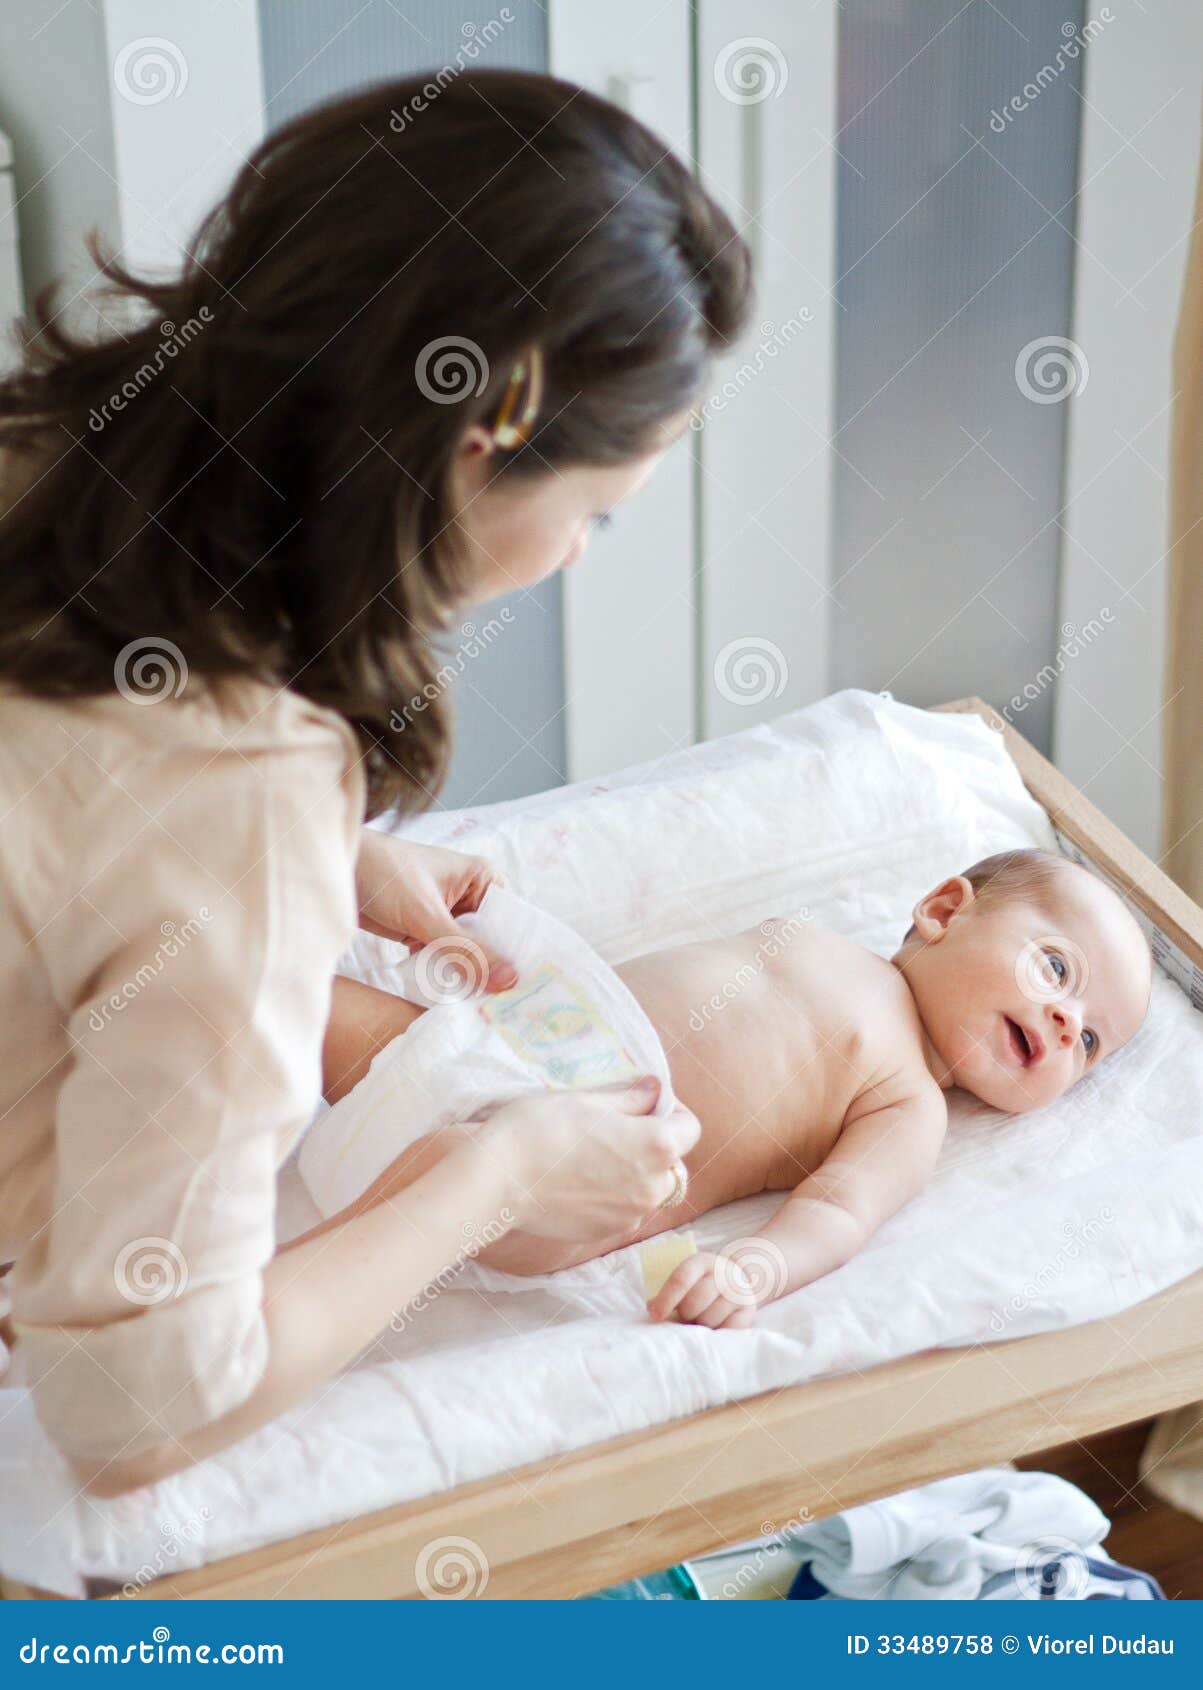 Changing Diaper Royalty Free Stock Photos - Image: 33489758